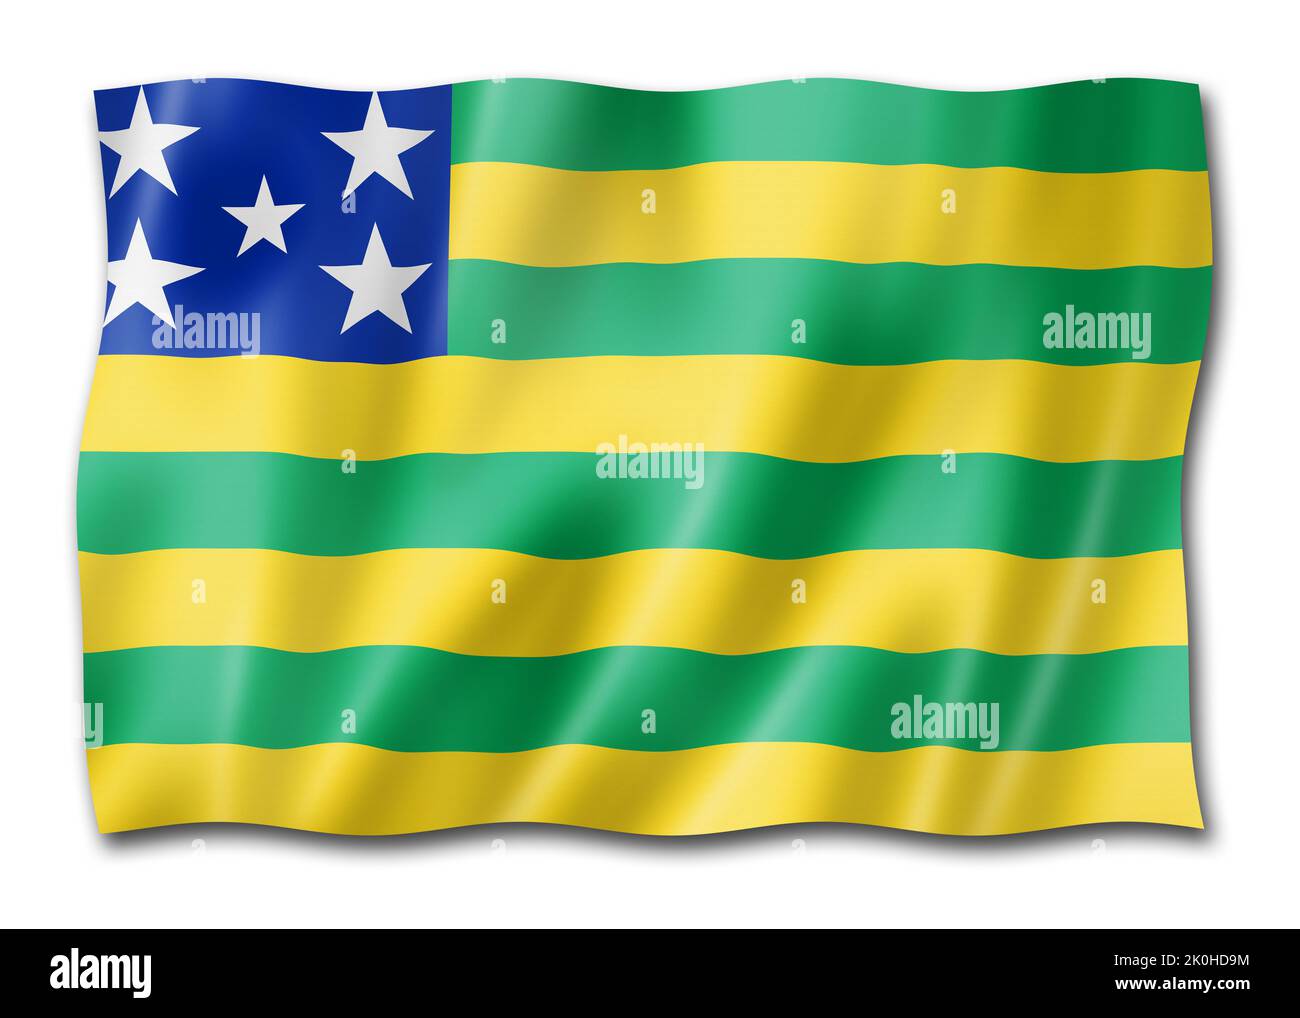 Goias state flag, Brazil waving banner collection. 3D illustration Stock Photo